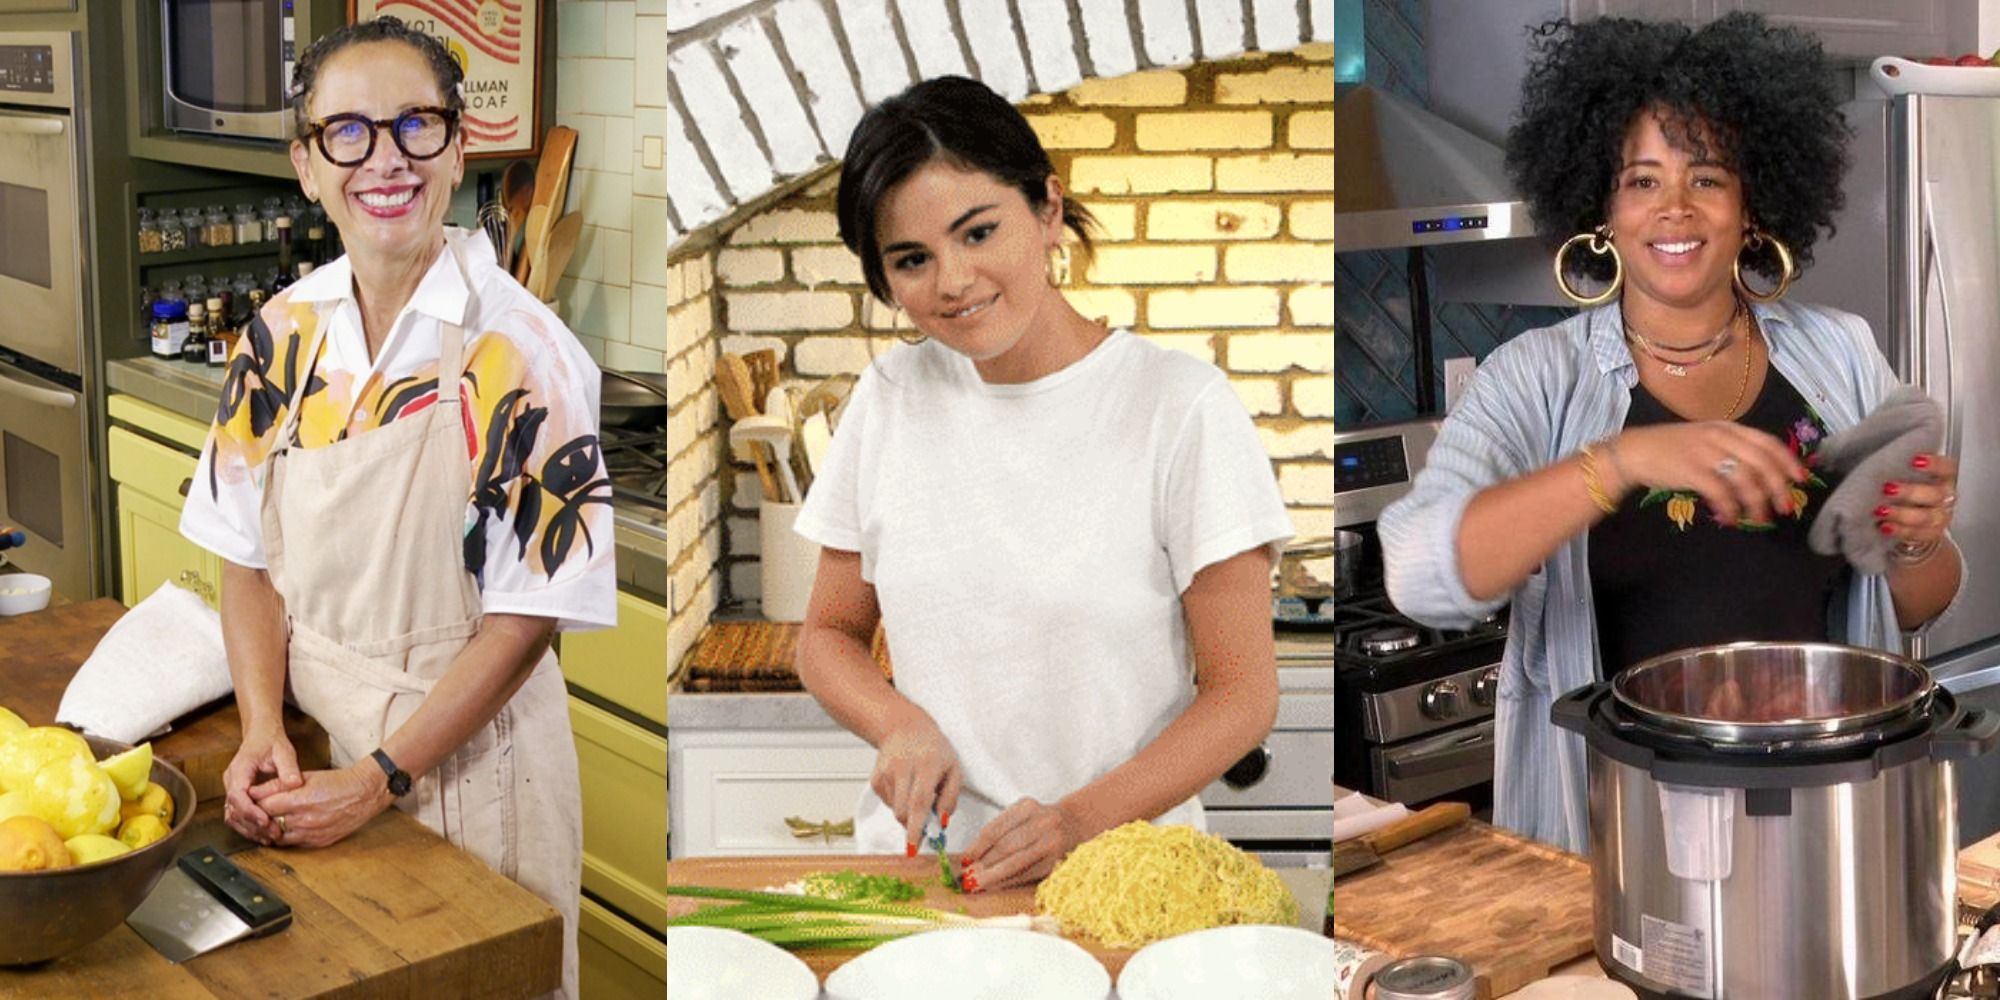 Selena Chef vs Cooking With Paris 5 Things We Love About Each Show